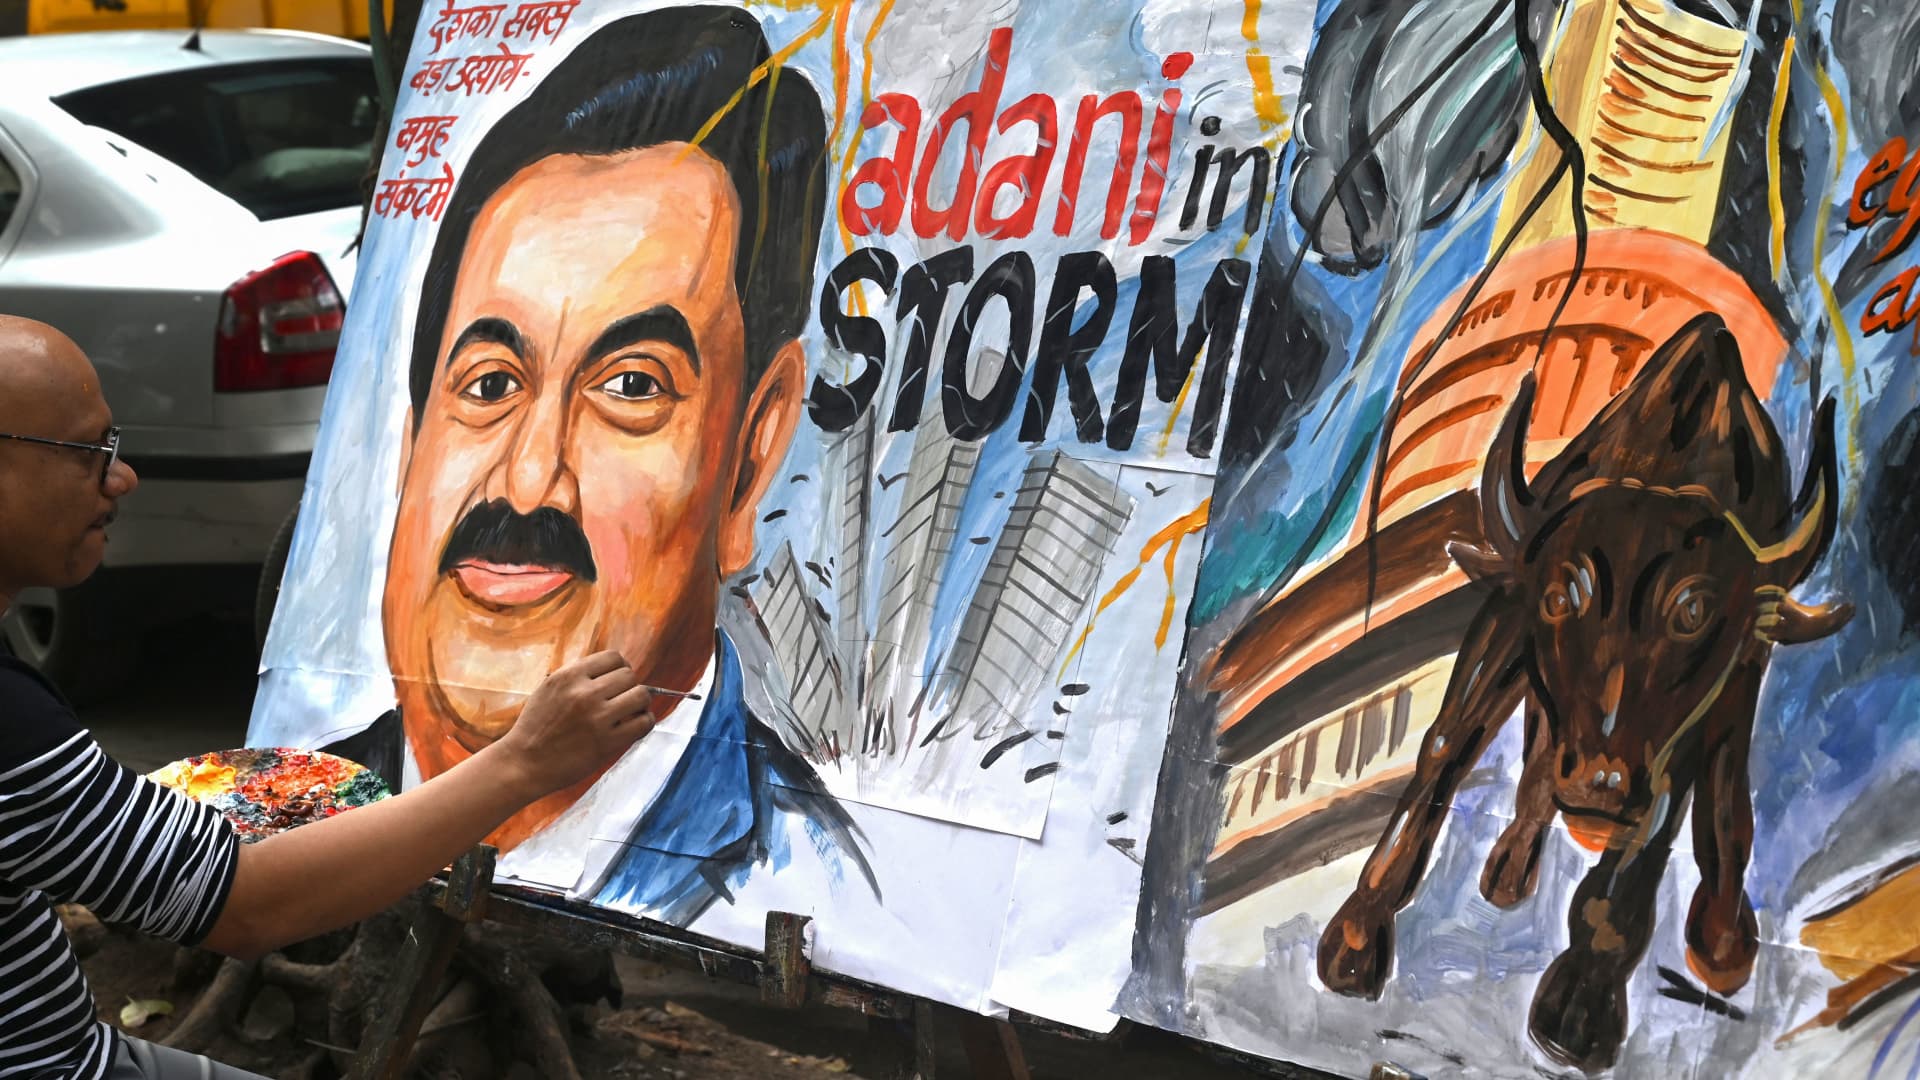 NYU's 'Dean of Valuation' says Adani Group exploited 'weakest links' in Indian institutions